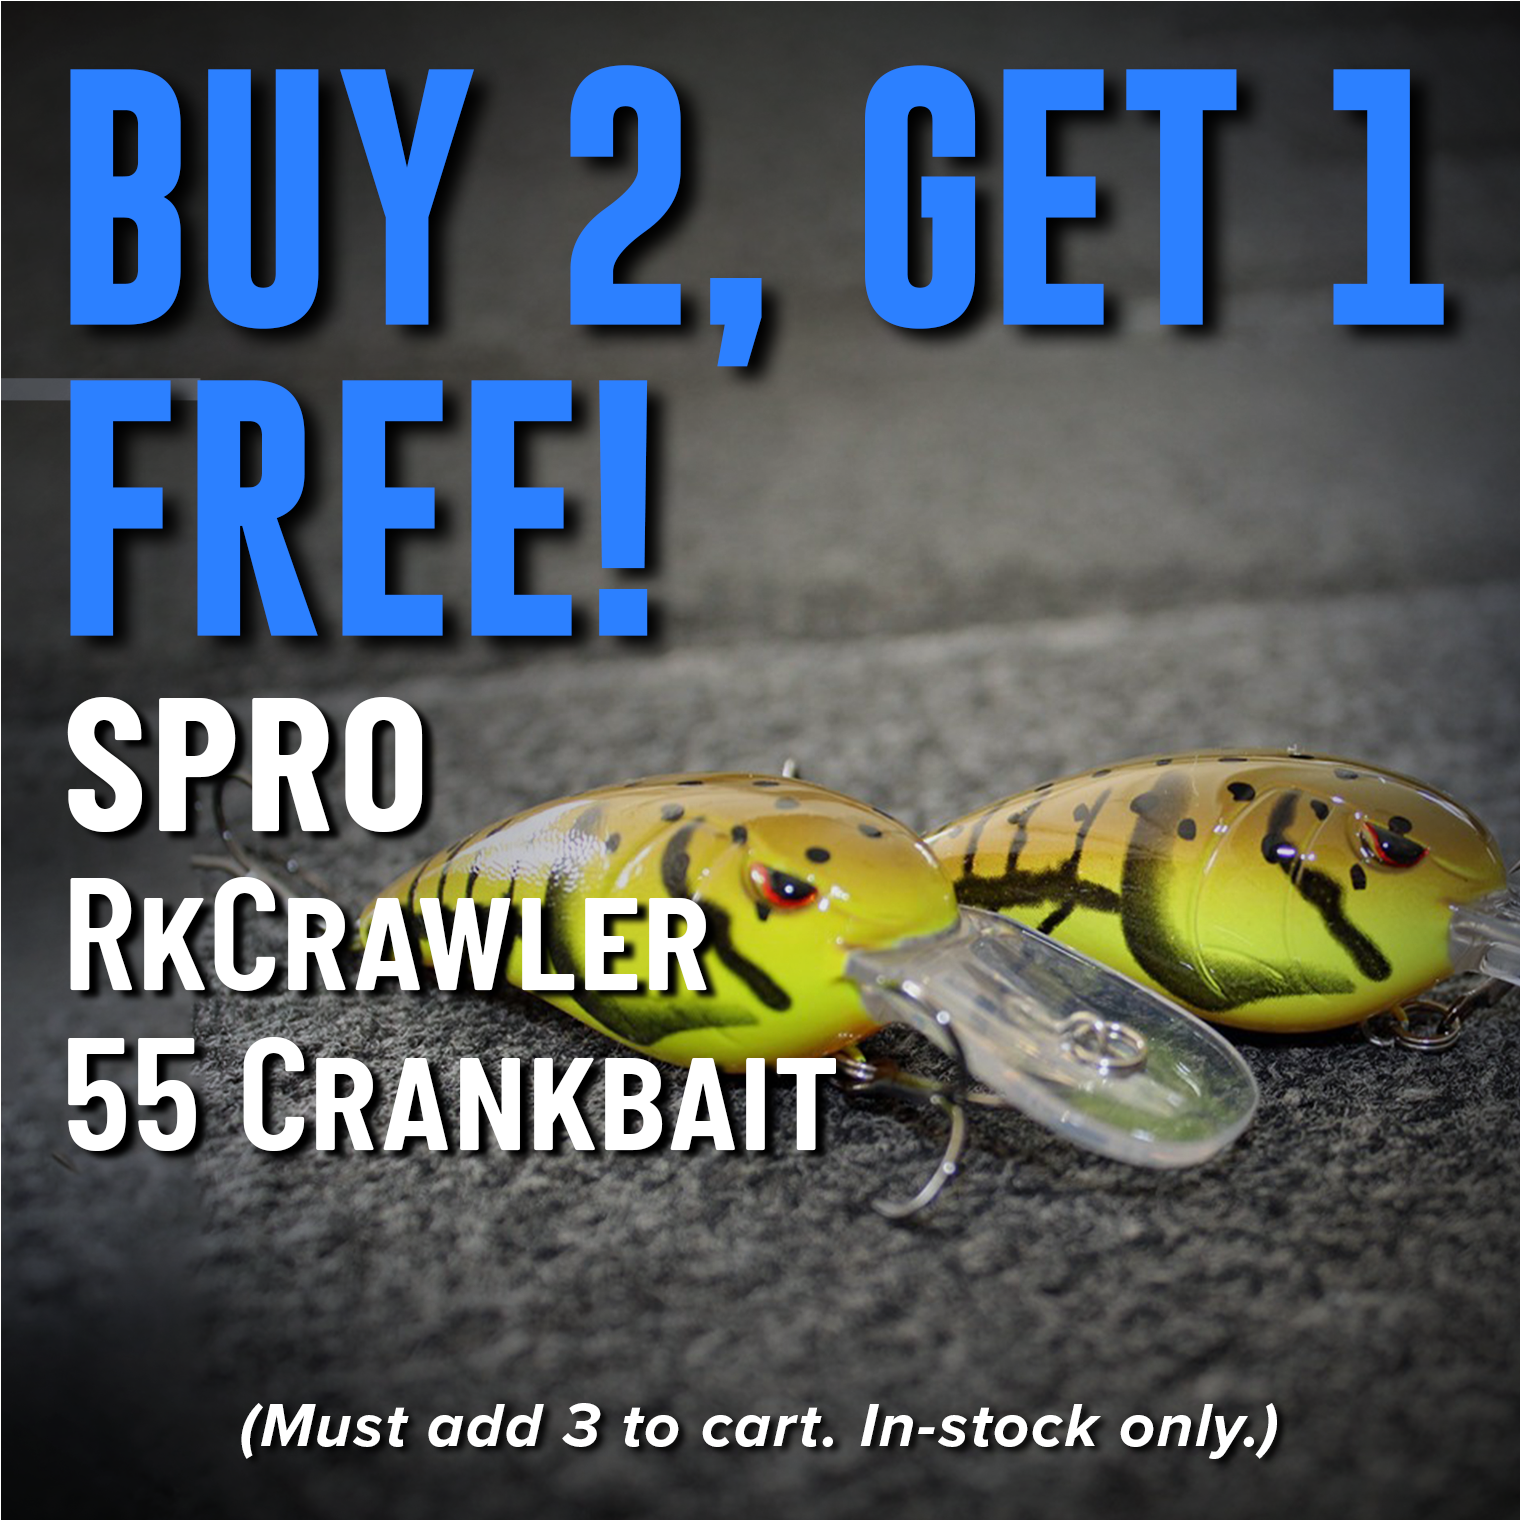 Buy 2, Get 1 Free! SPRO RkCrawler 55 Crankbait (Must add 3 to cart. In-stock only.)